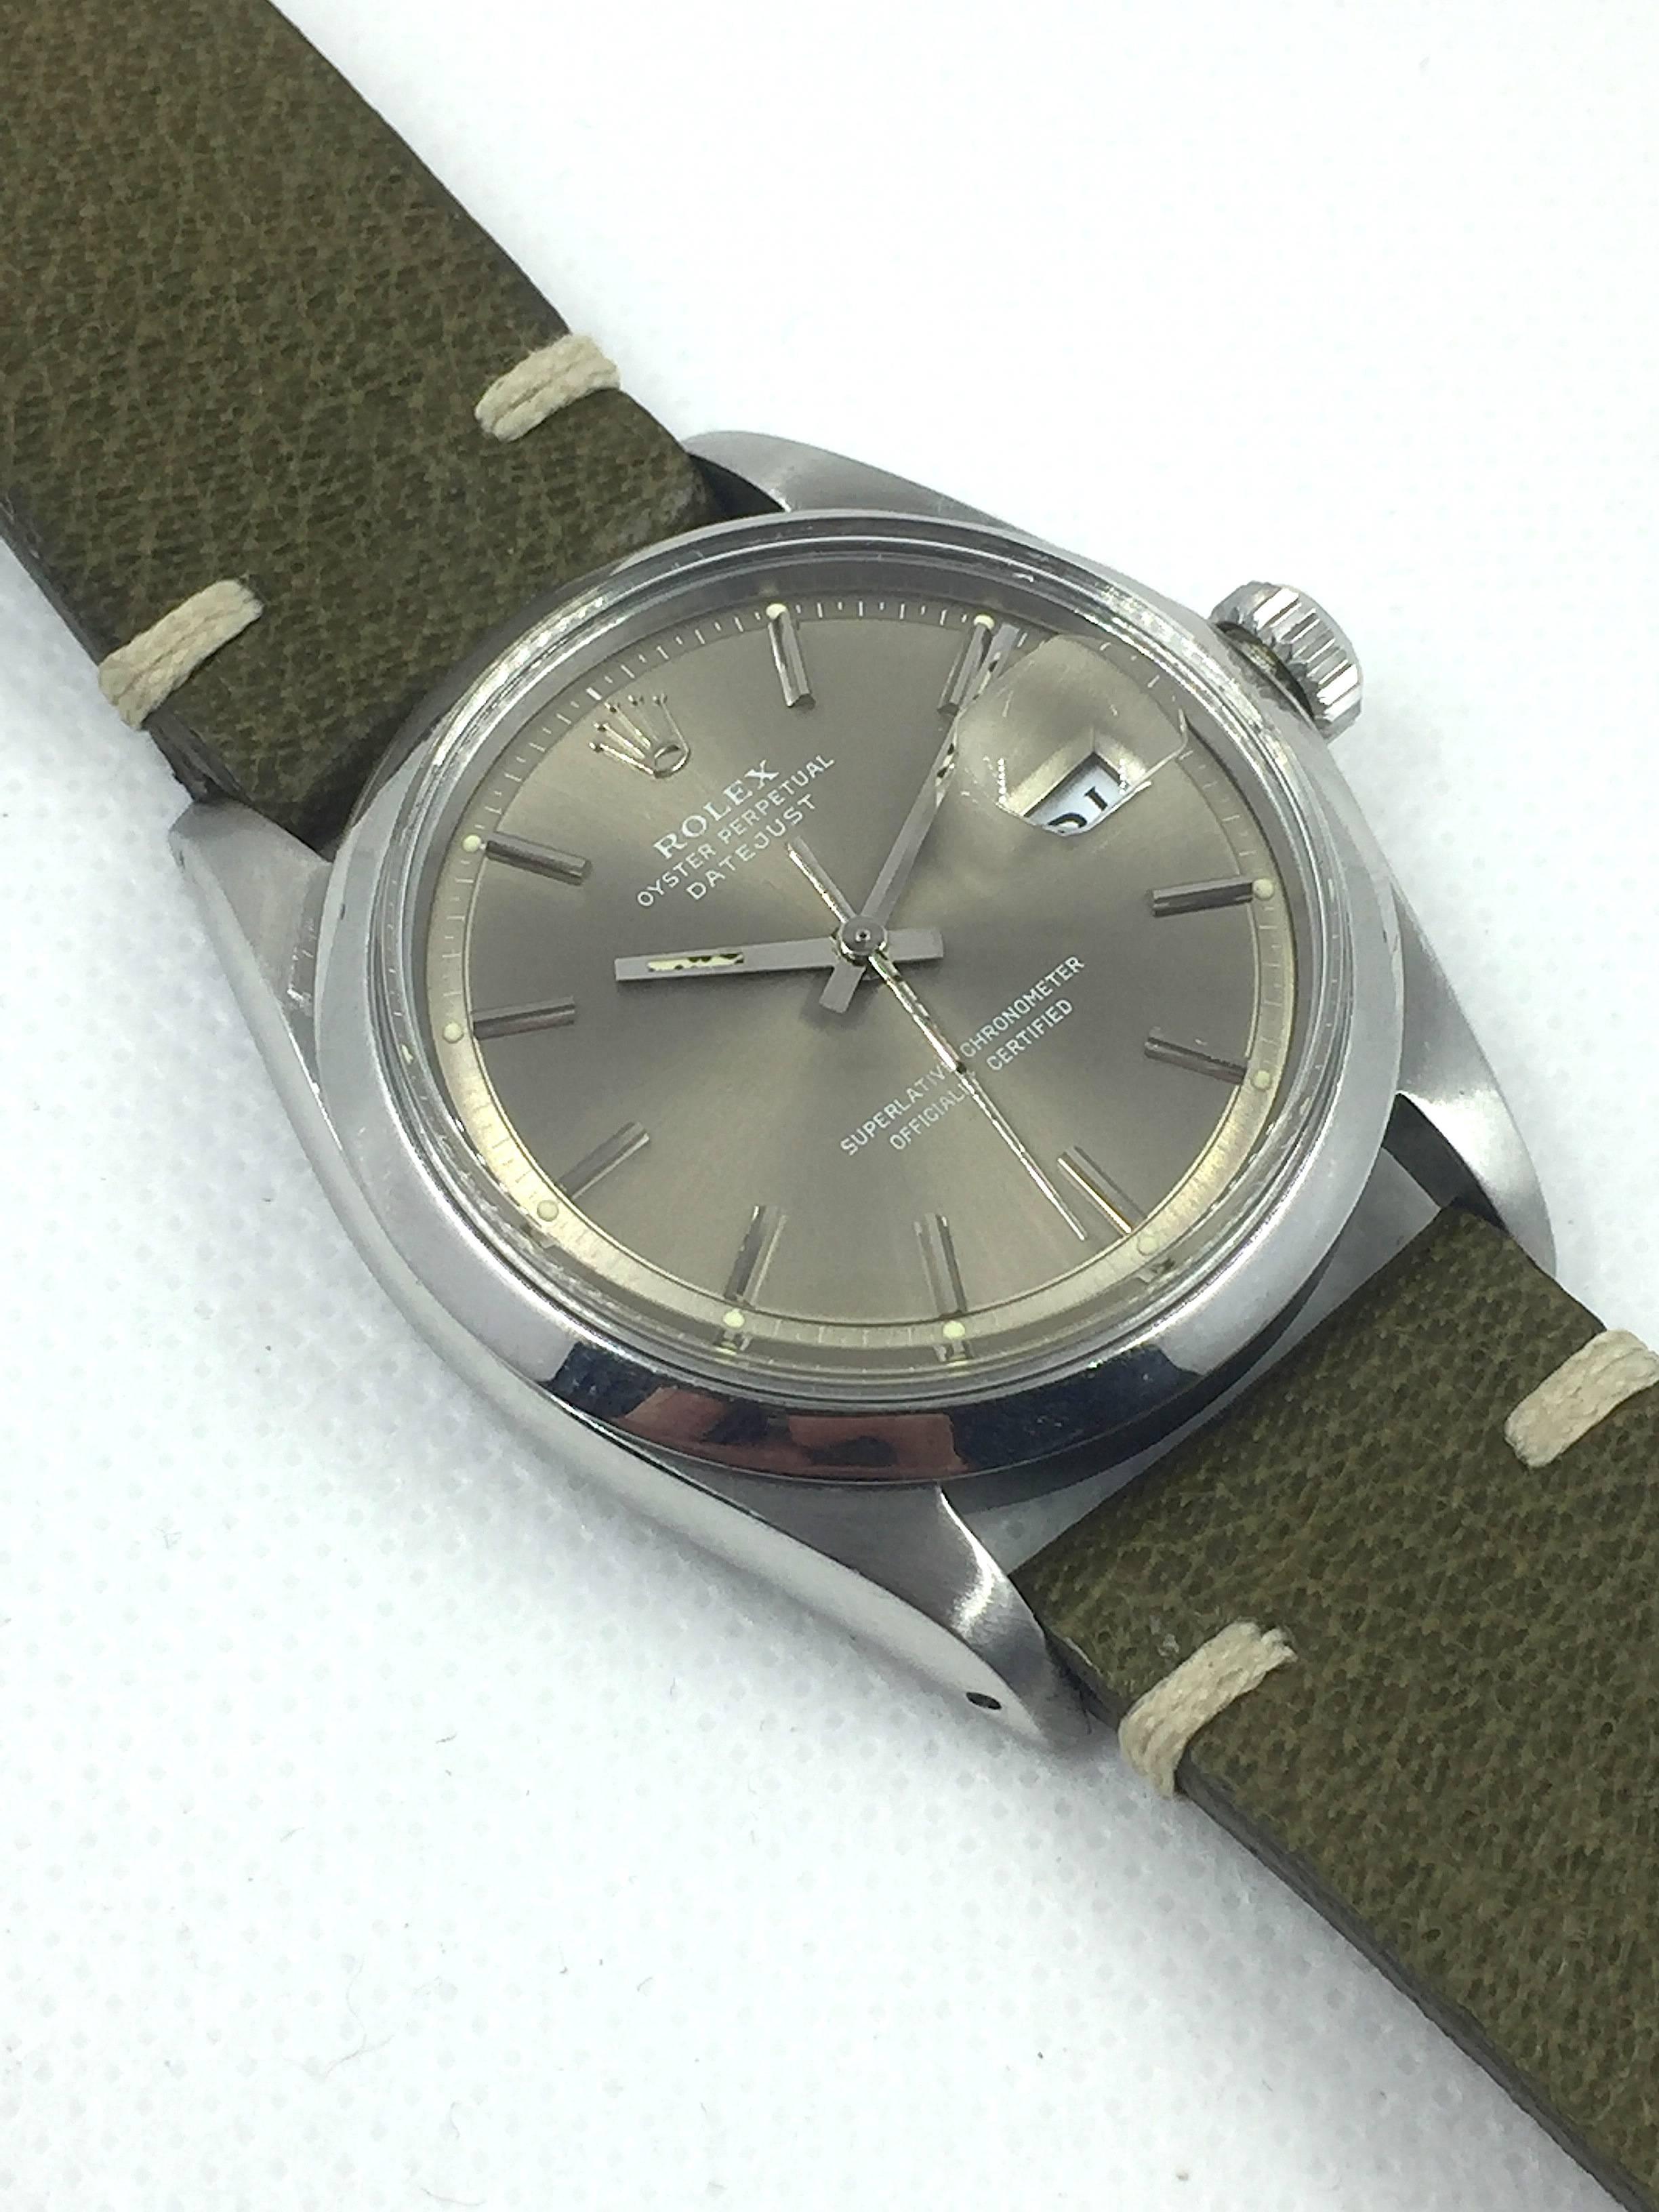 Women's or Men's Rolex Stainless Steel Oyster Perpetual Datejust Wristwatch, circa 1960s